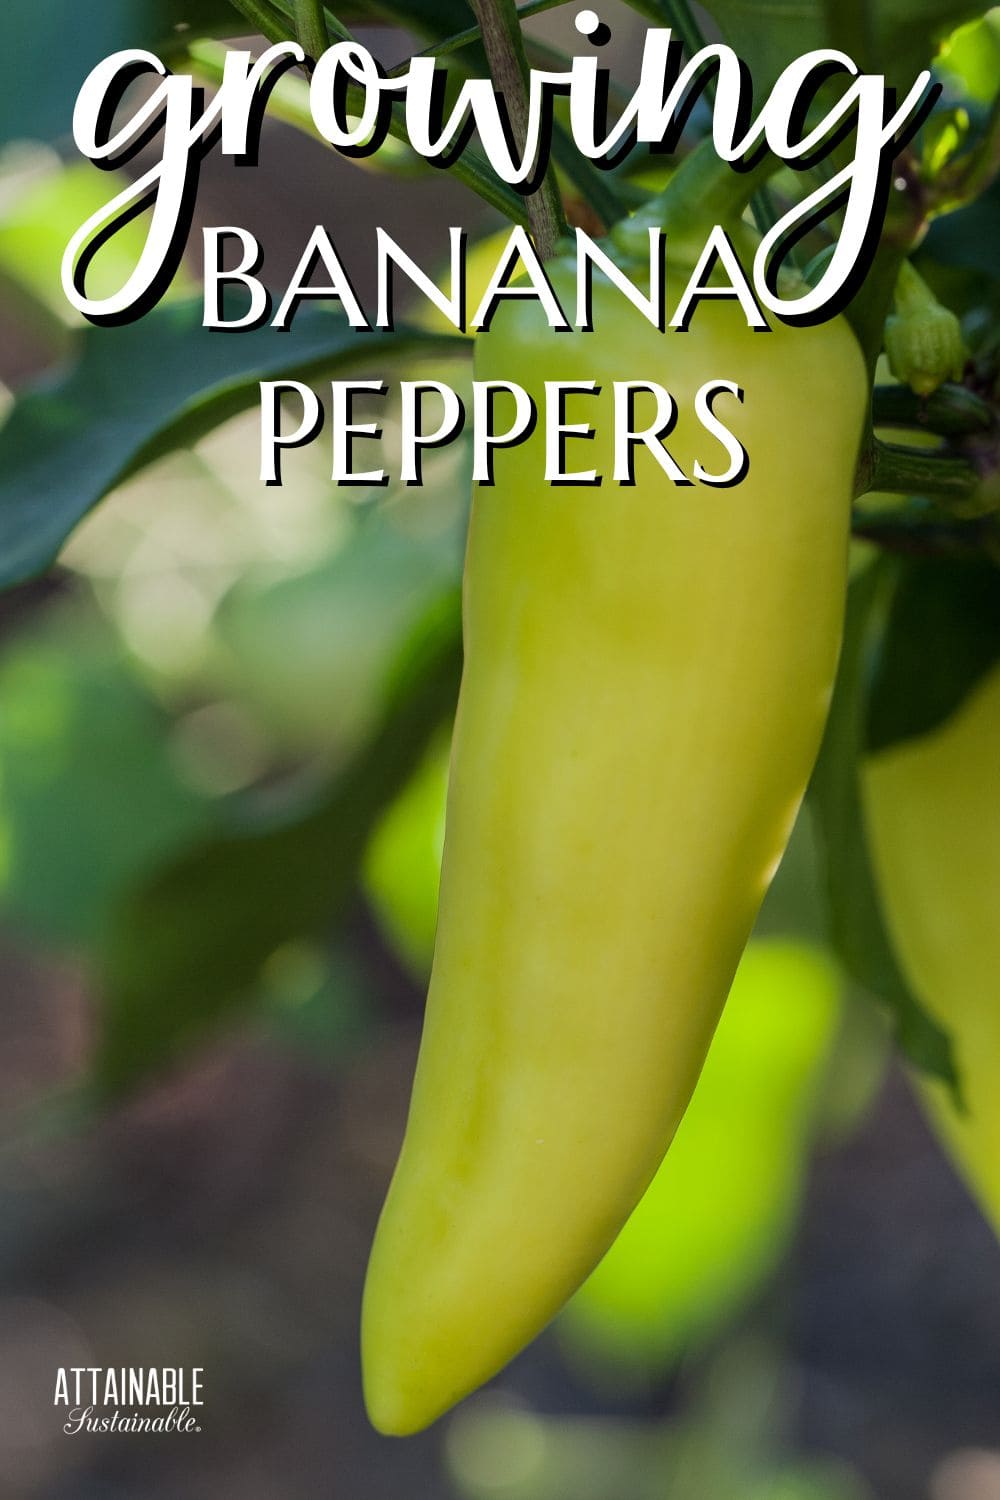 single banana pepper in focus, growing on a plant.